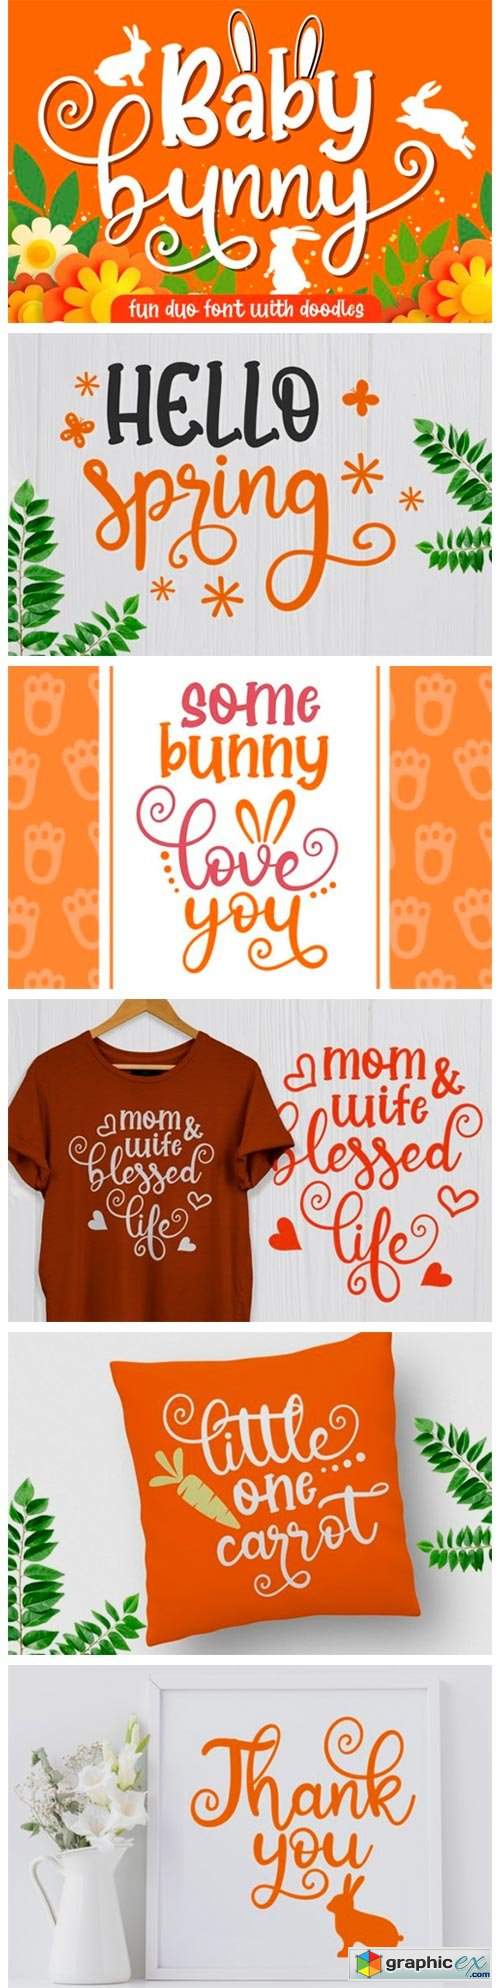  Baby Bunny Font 